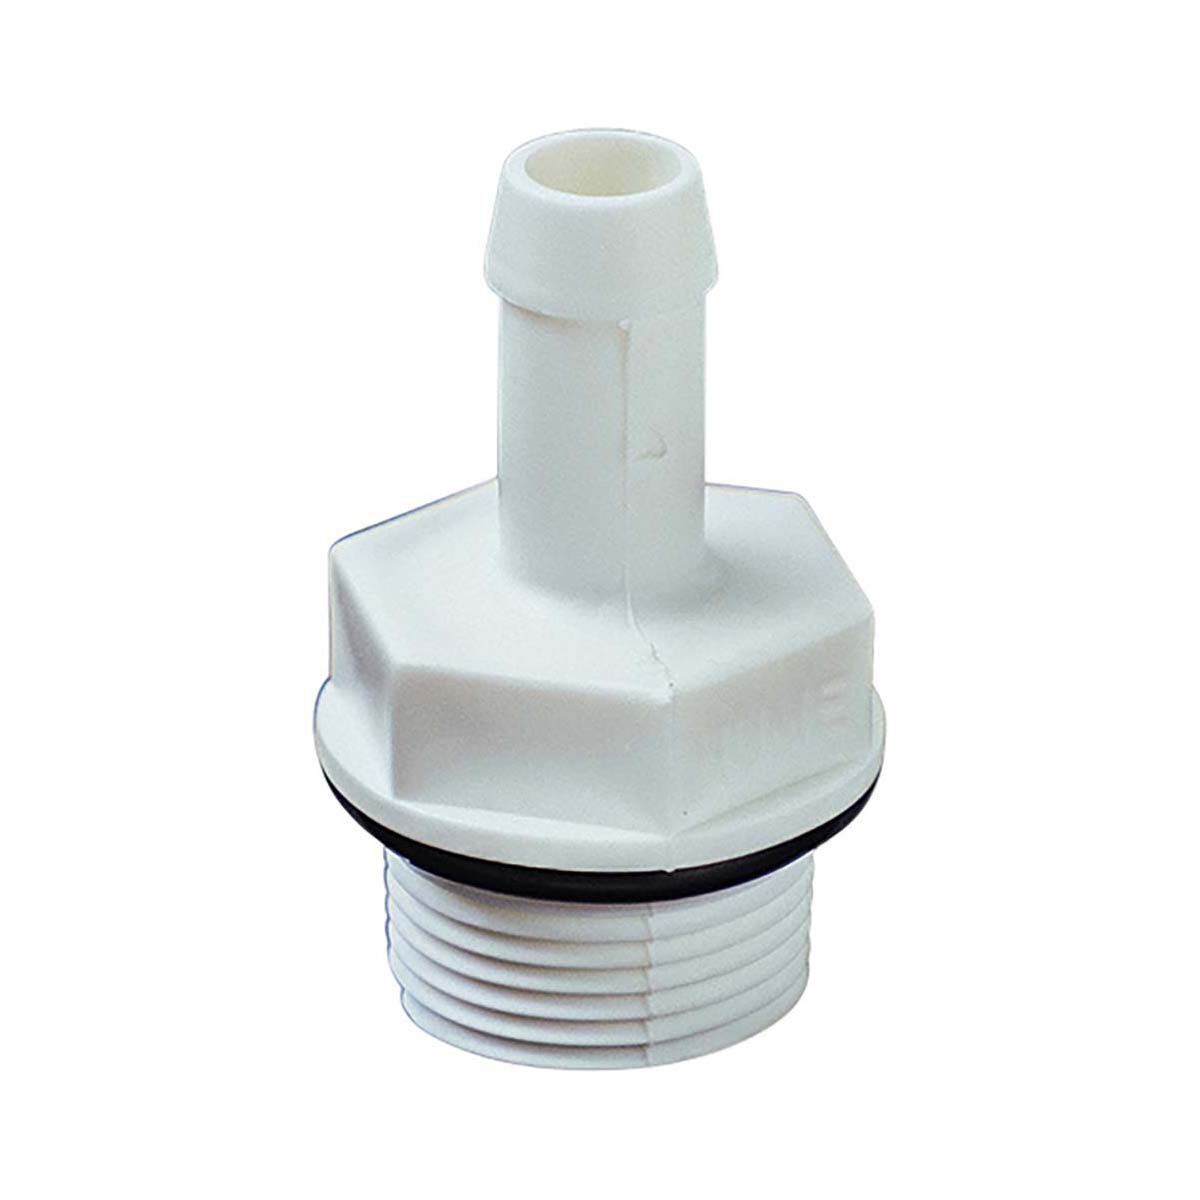 20mm 25mm 32mm 40mm 50mm ID x 1/2 3/4 1 1-1/4 1-1/2 BSP Male Thread  Gray PVC Tube Joint Pipe Fitting Water Connector